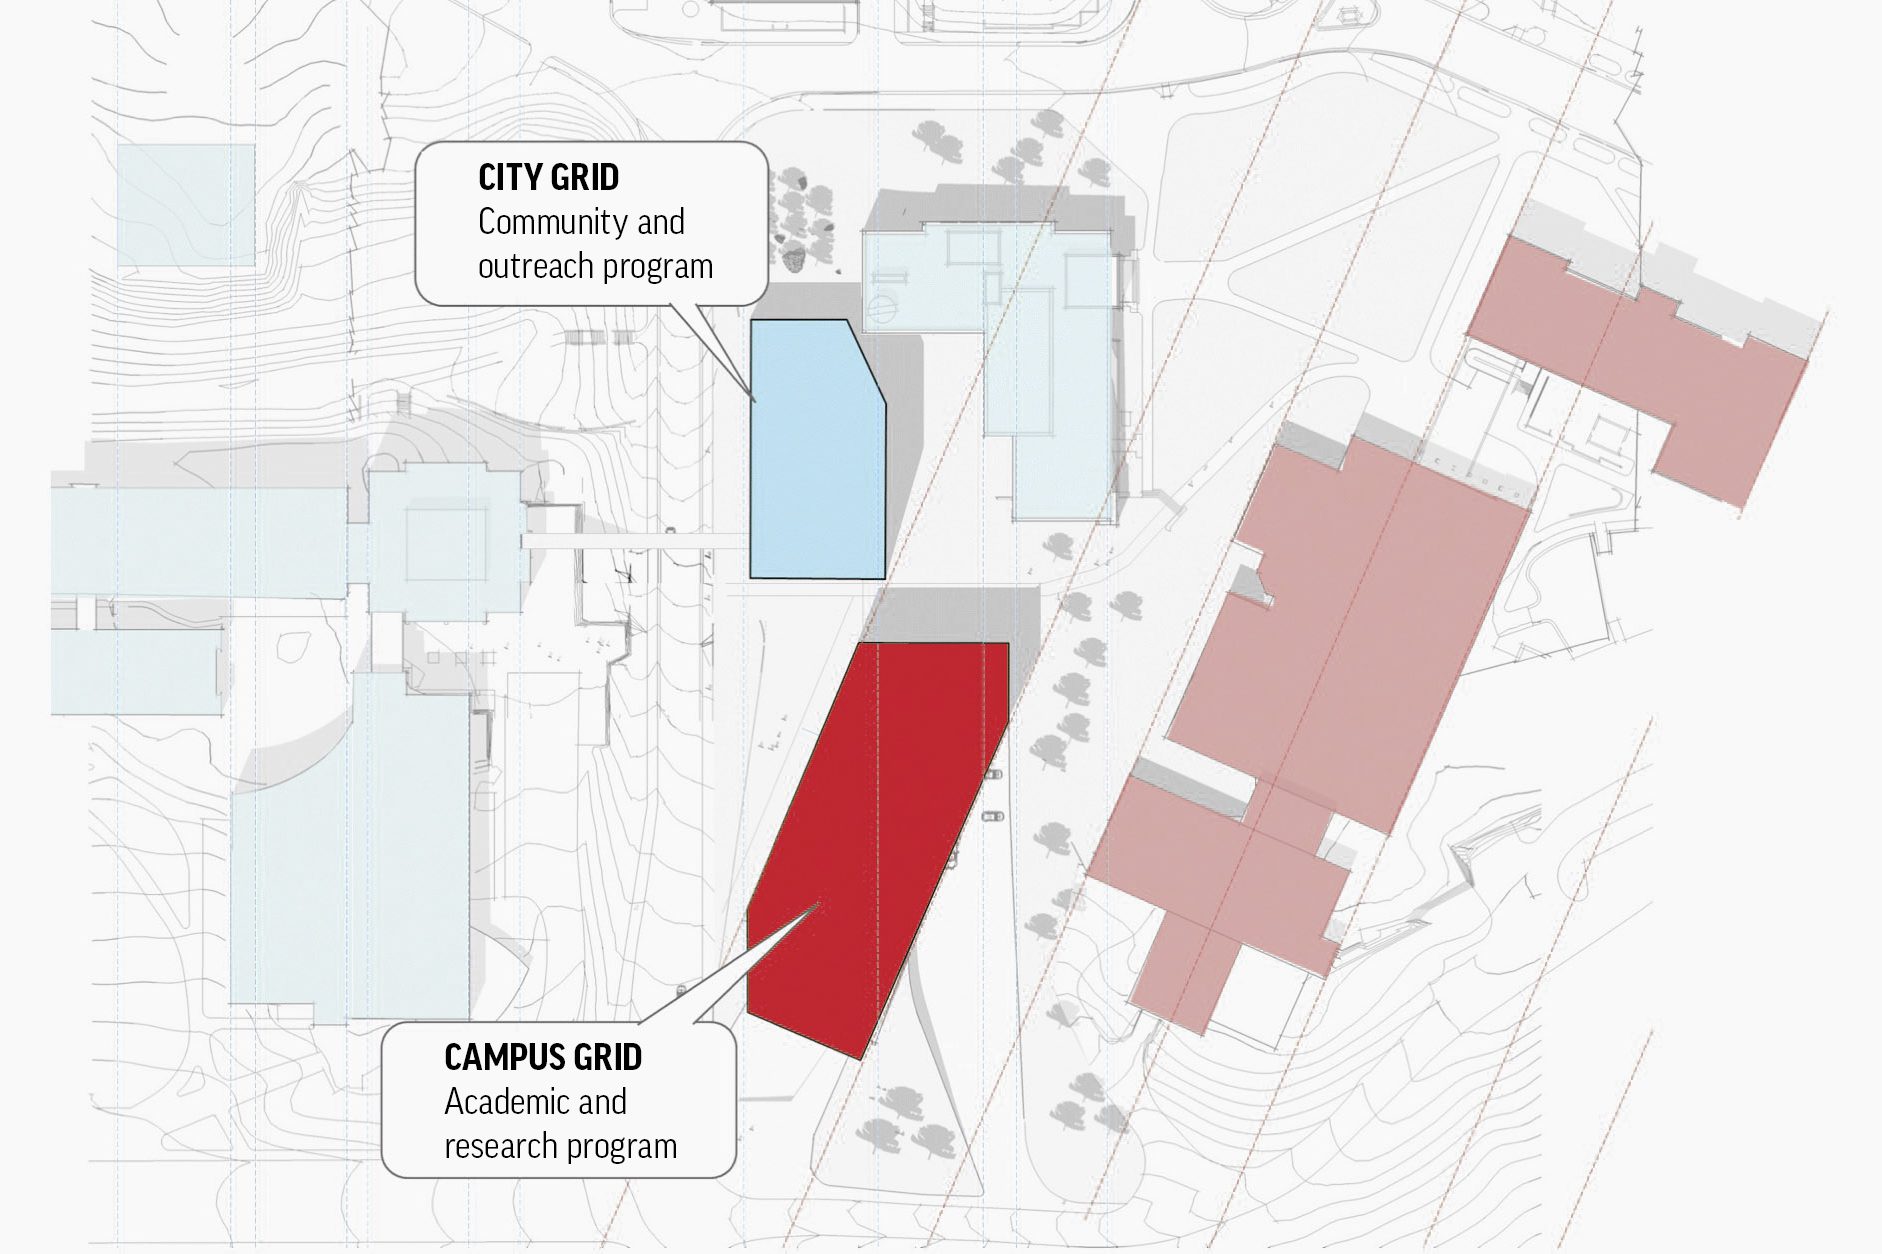 Image of the site plan showing the Earth, Energy & Environment Center on the KU campus.